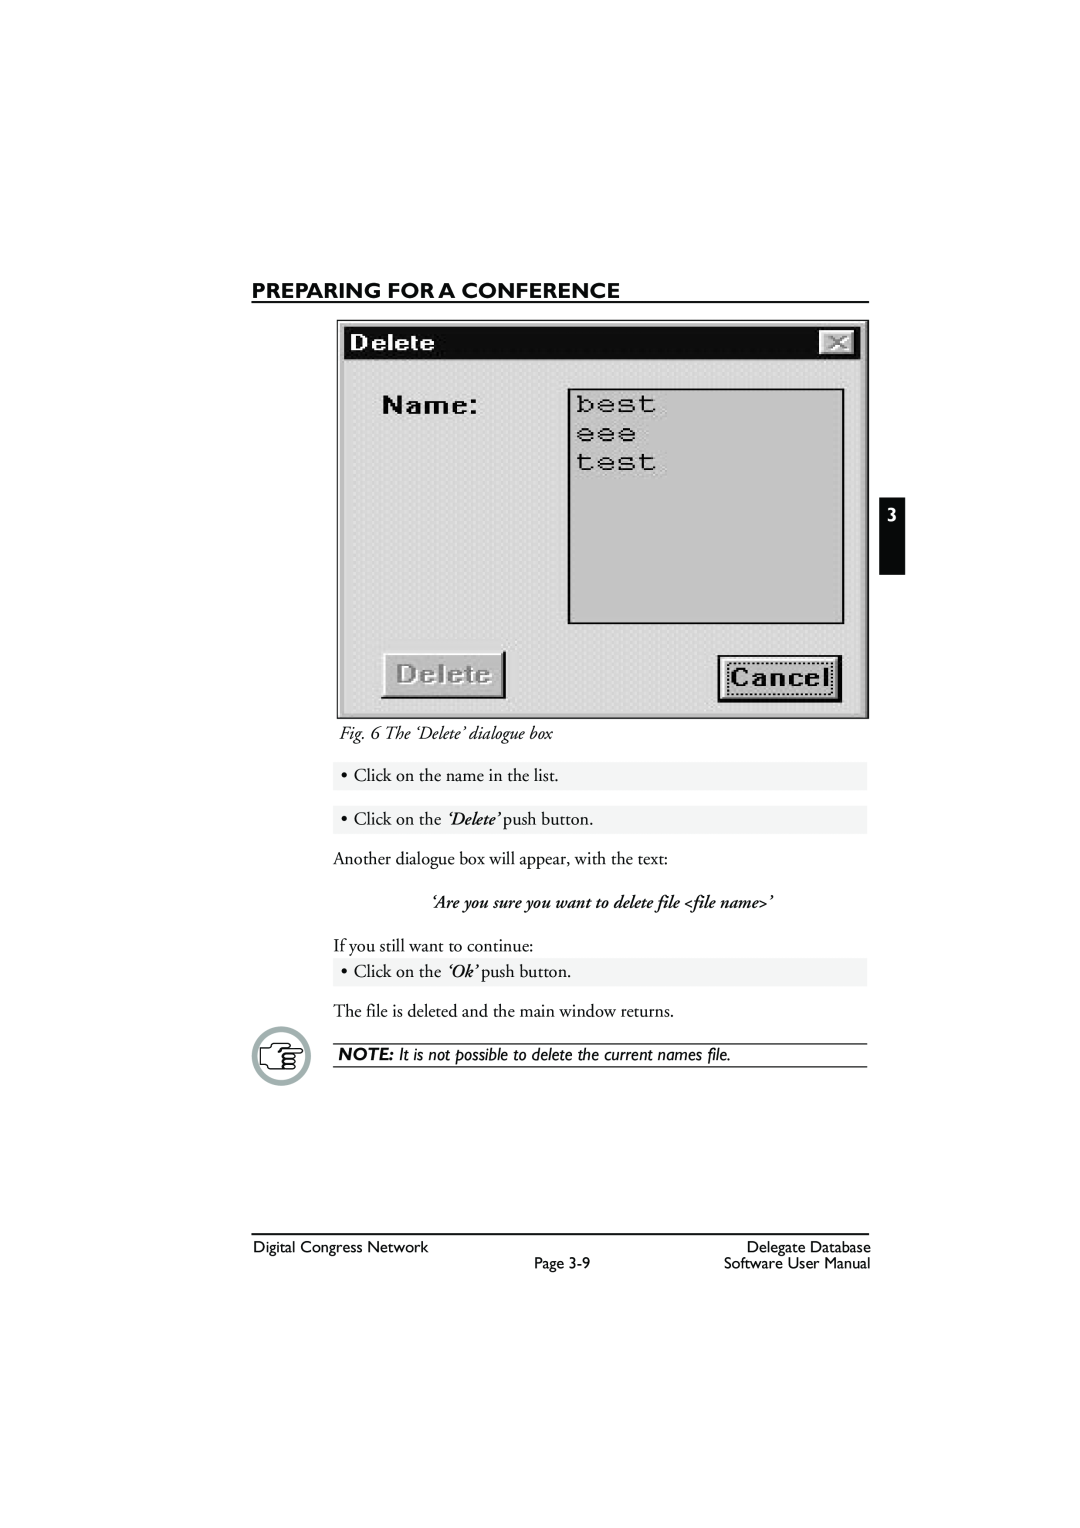 Bosch Appliances LBB3580 user manual The ‘Delete’ dialogue box, Preparing For A Conference, Click on the name in the list 